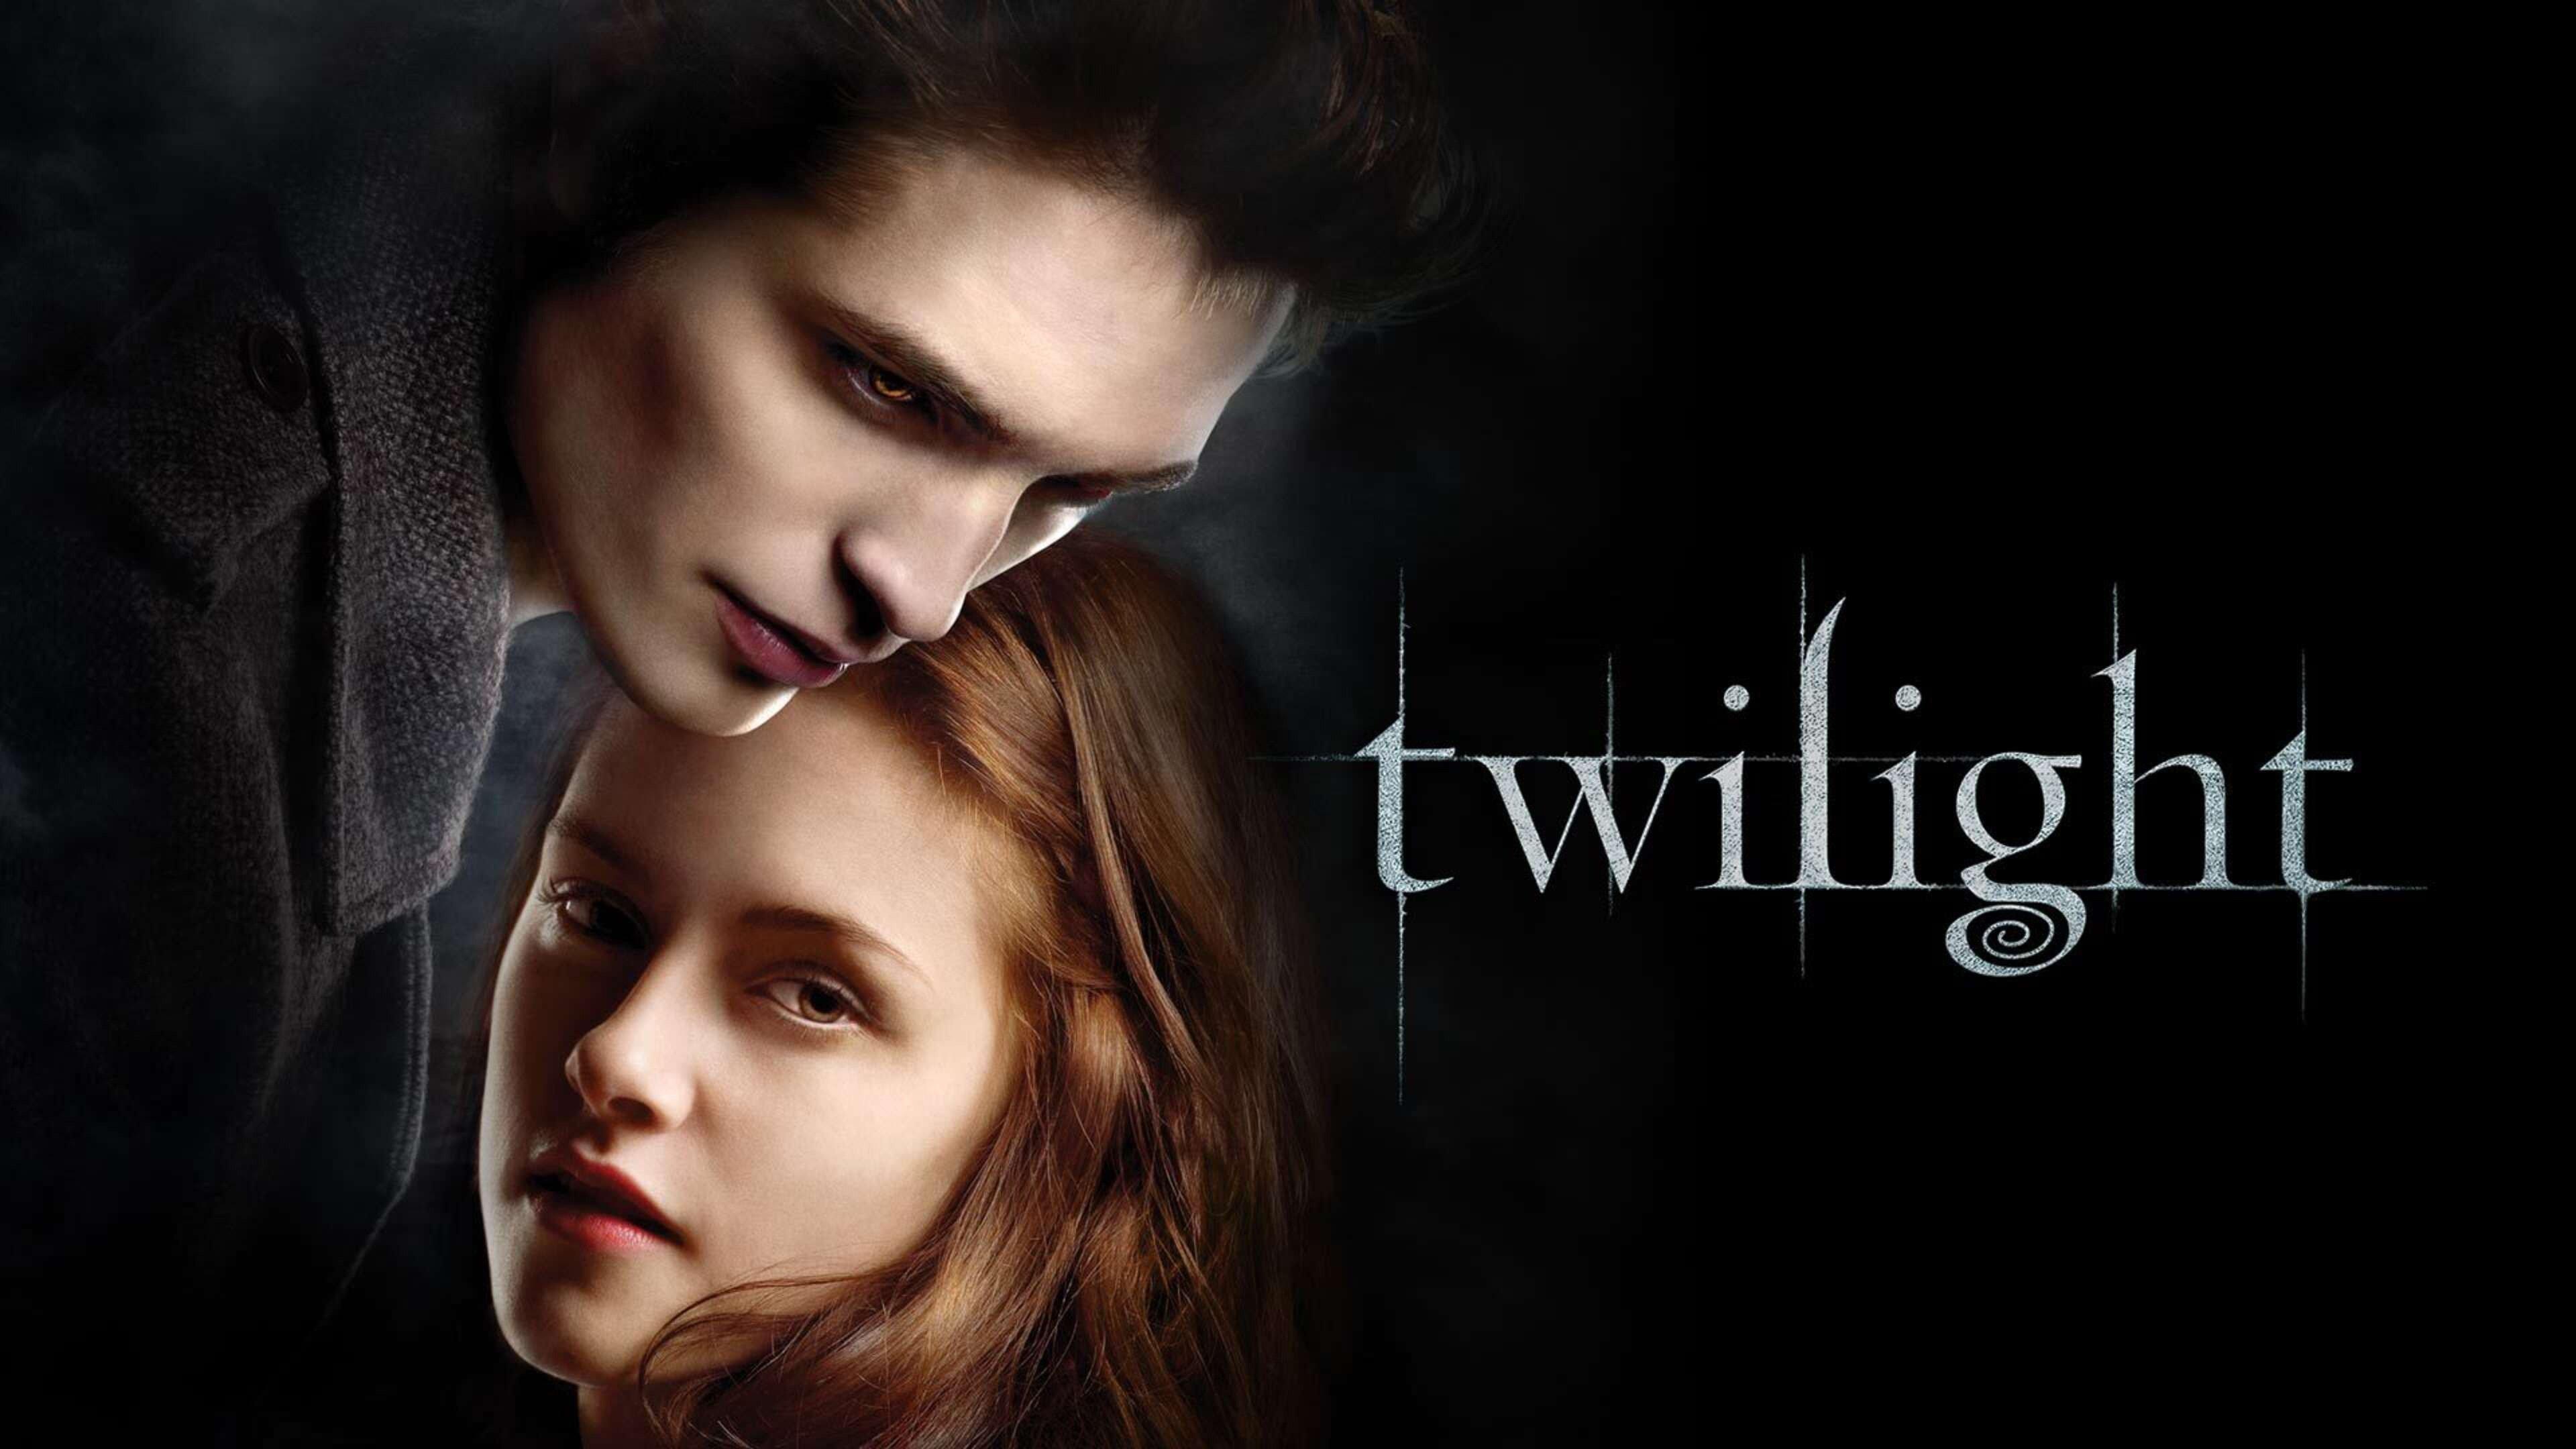 Watch Twilight Full Movie Streaming Online Philo (Free Trial)